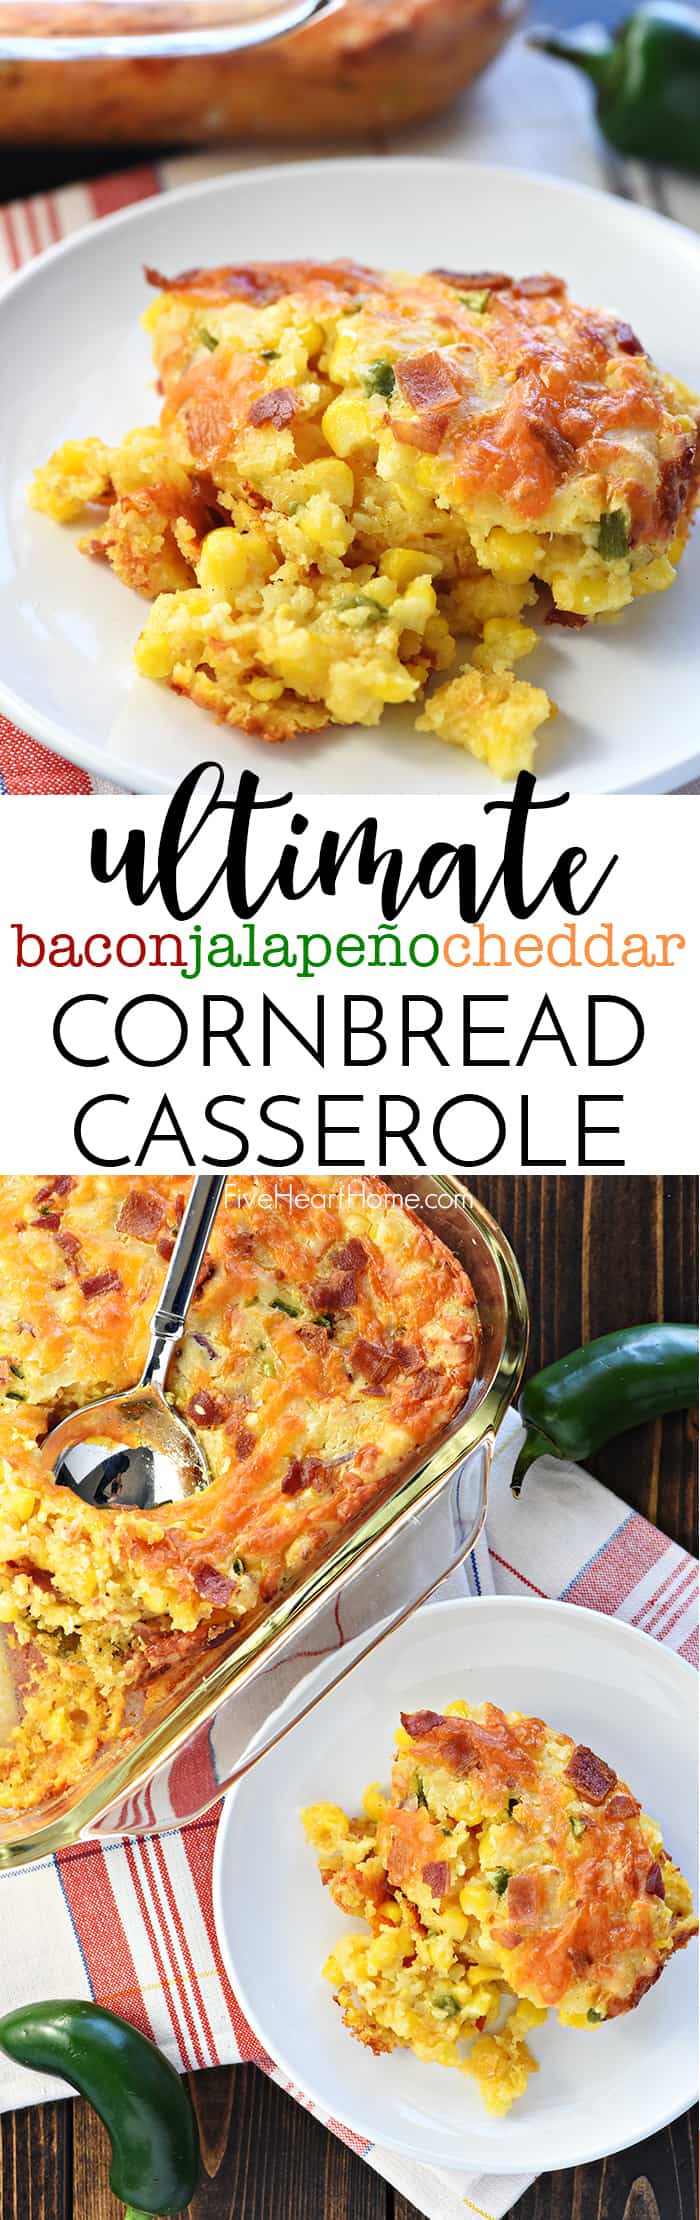 Ultimate Cornbread Casserole ~ with the addition of bacon, cheddar, and jalapeño, this flavorful, from-scratch recipe takes the classic side dish to a whole new level! | FiveHeartHome.com via @fivehearthome